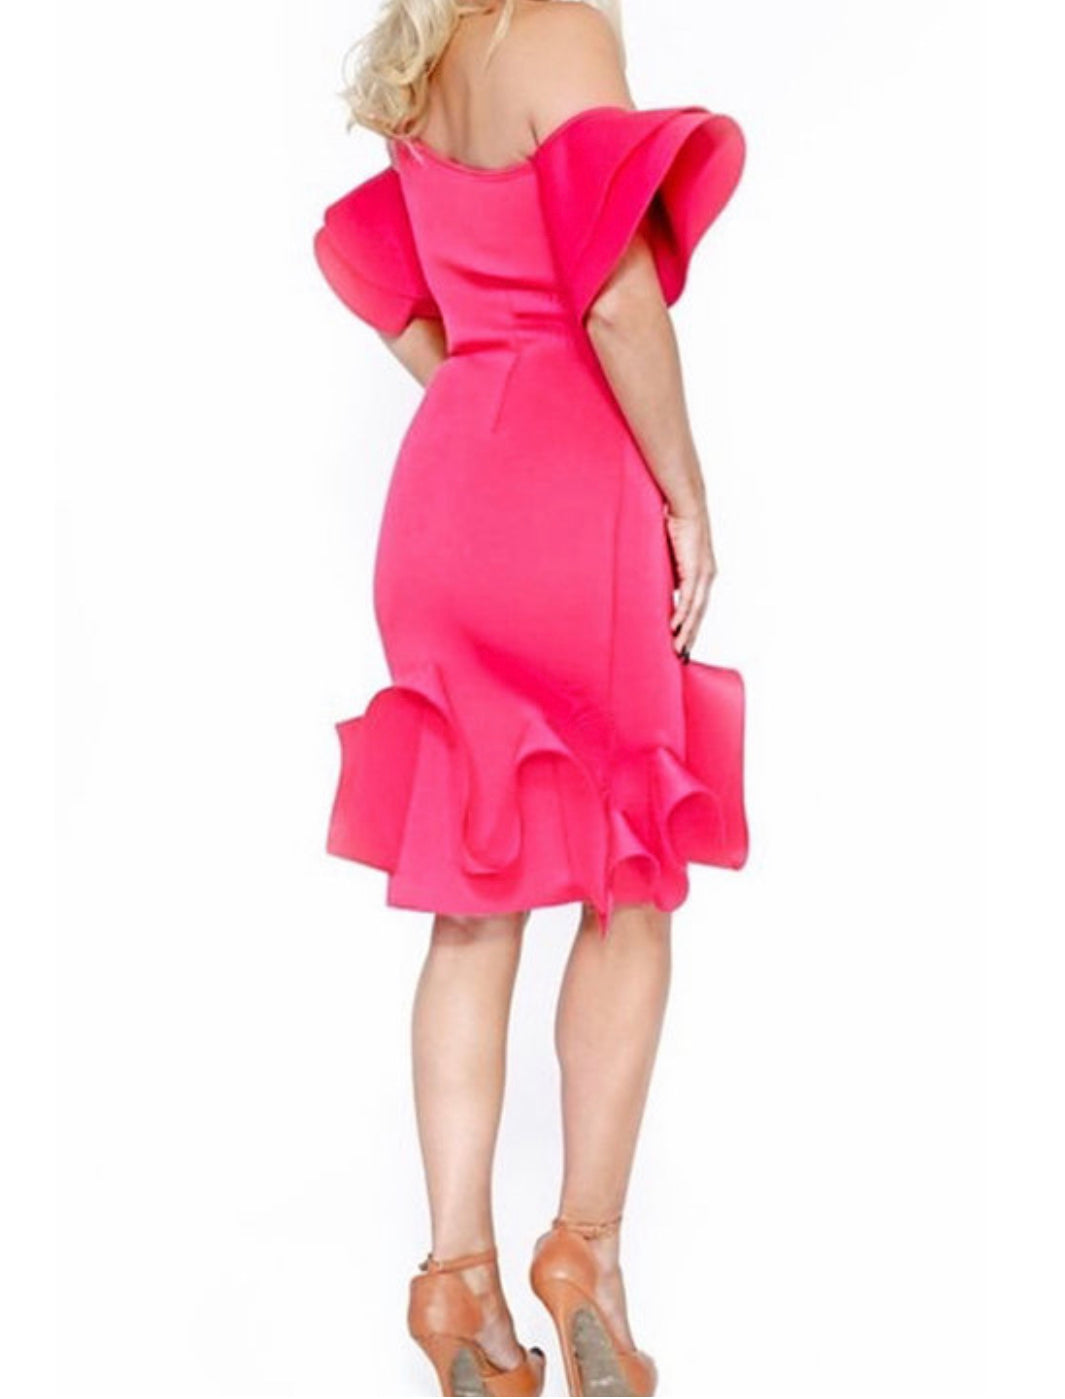 Claire Ruffle Dress - Rehabcouture